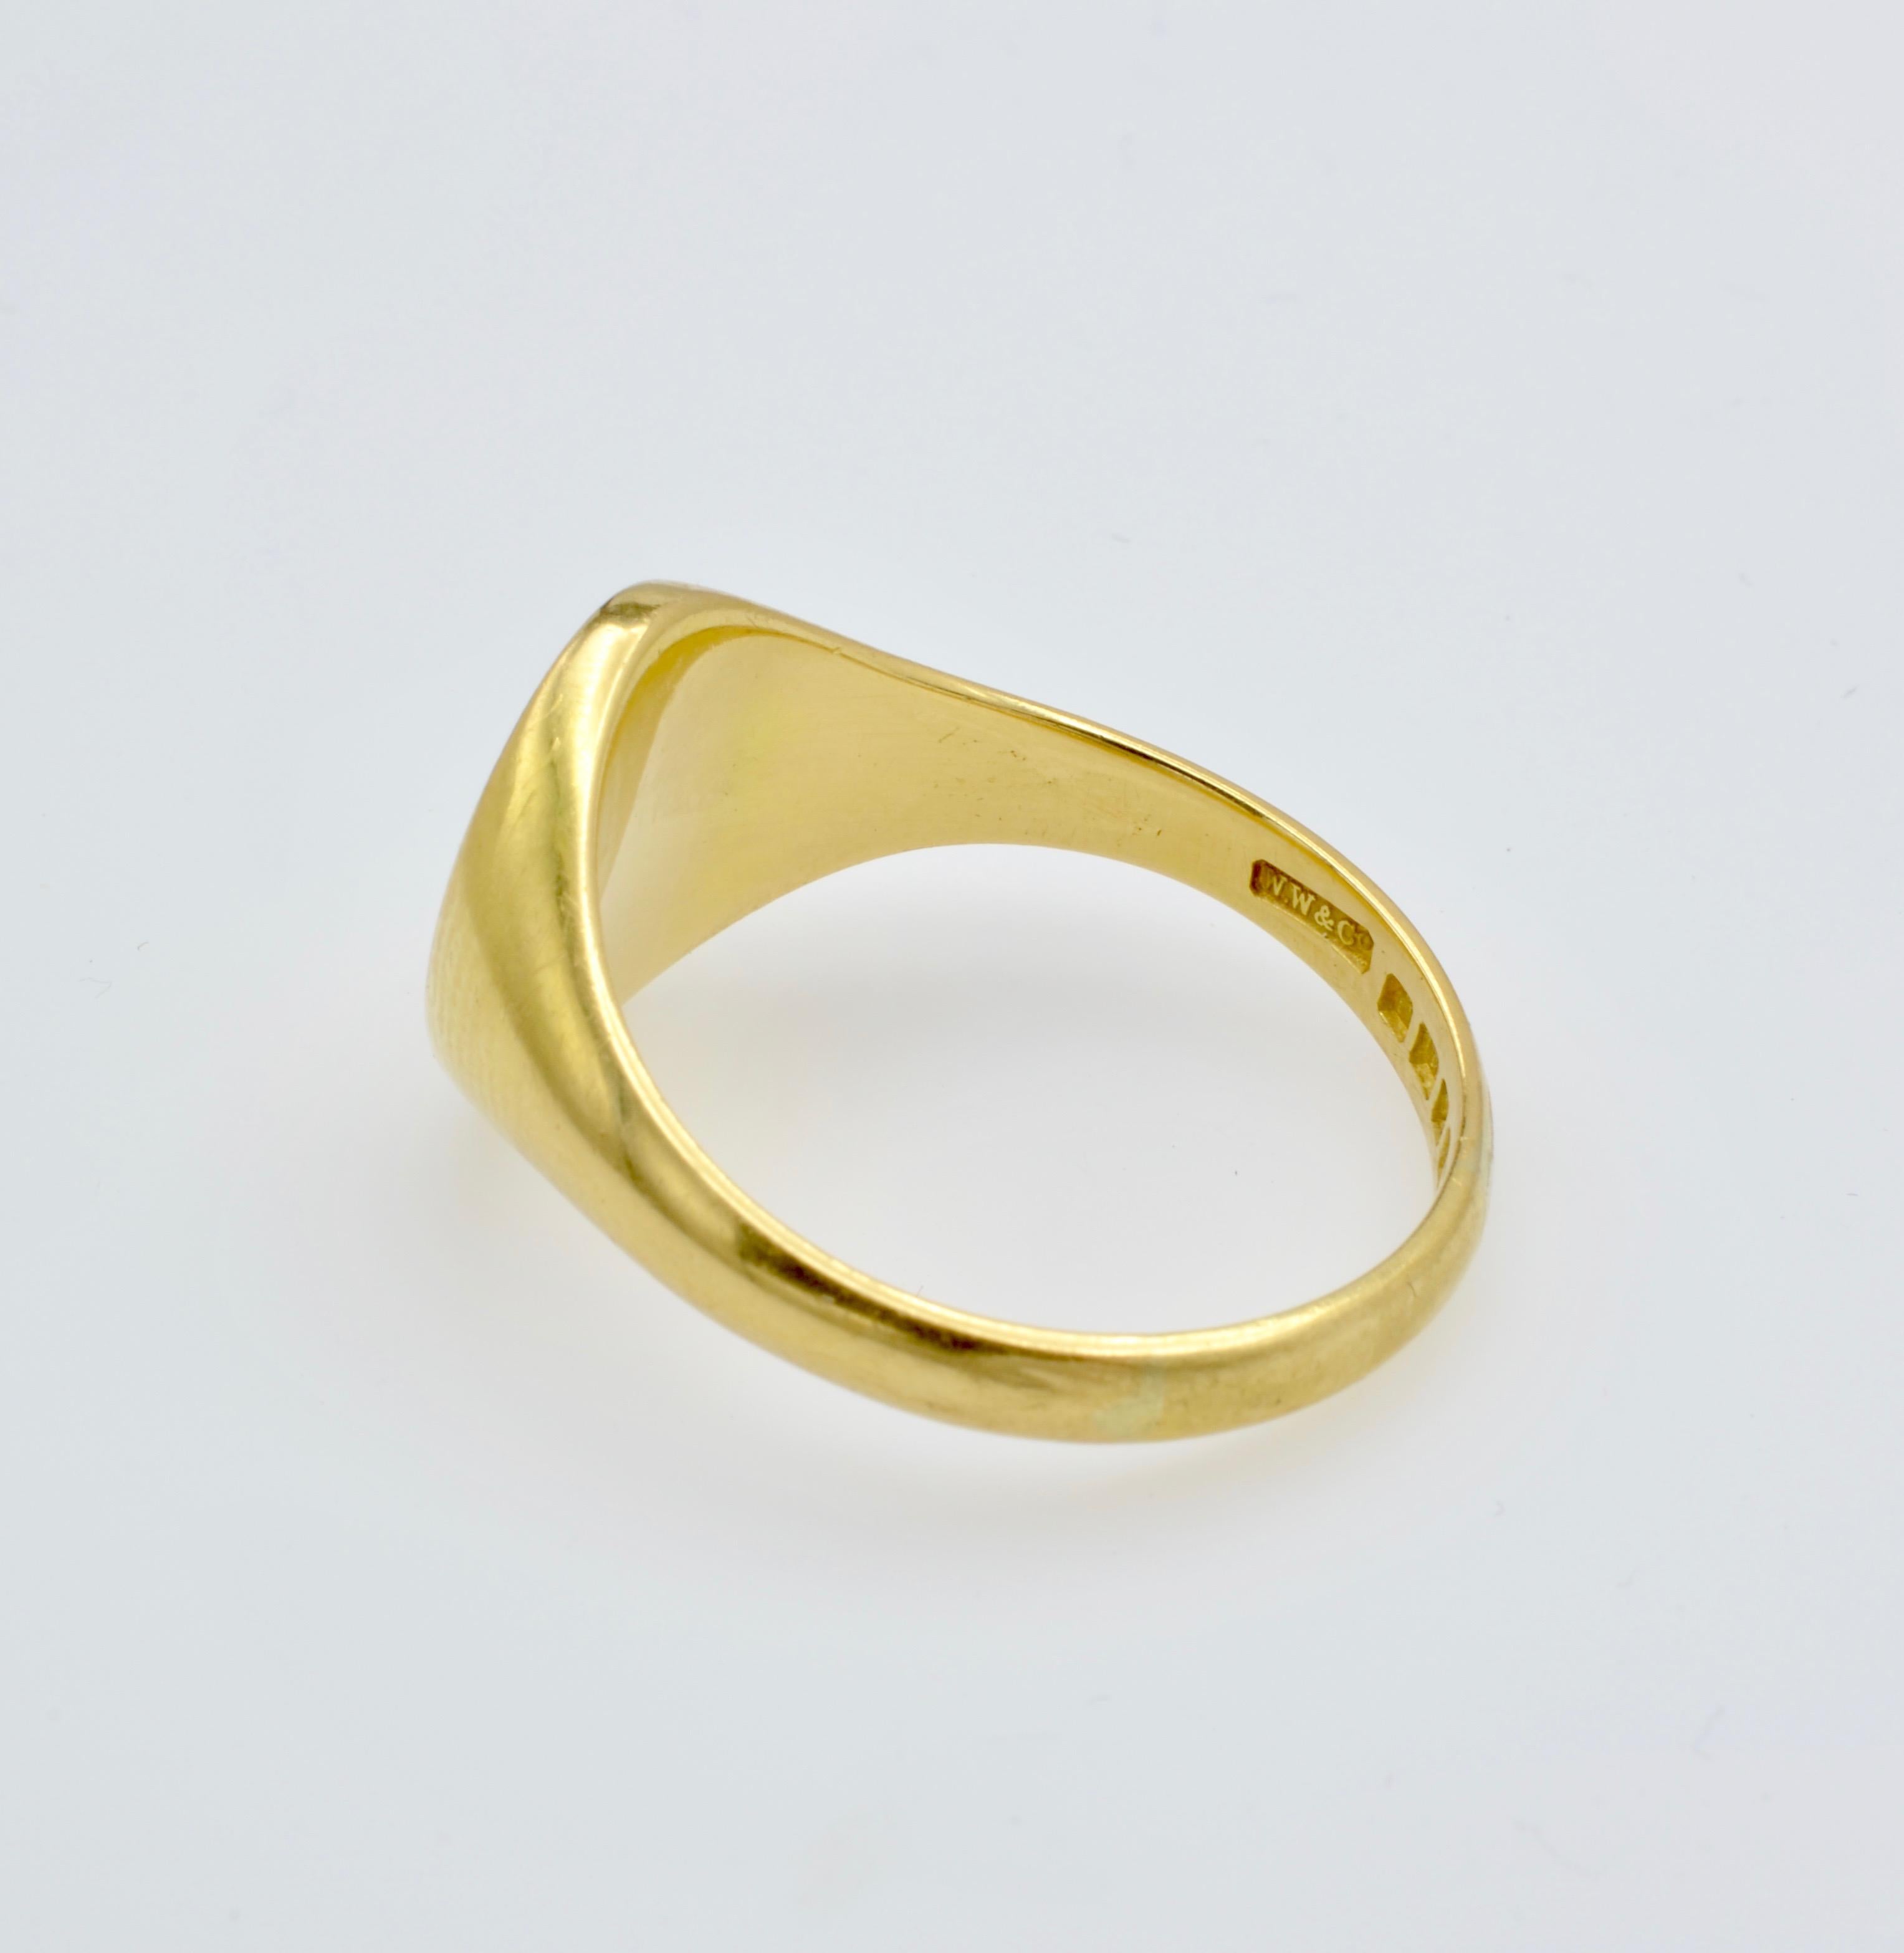 English Signet Ring London 18 Karat Yellow Gold Engraved and Stamped For Sale 1